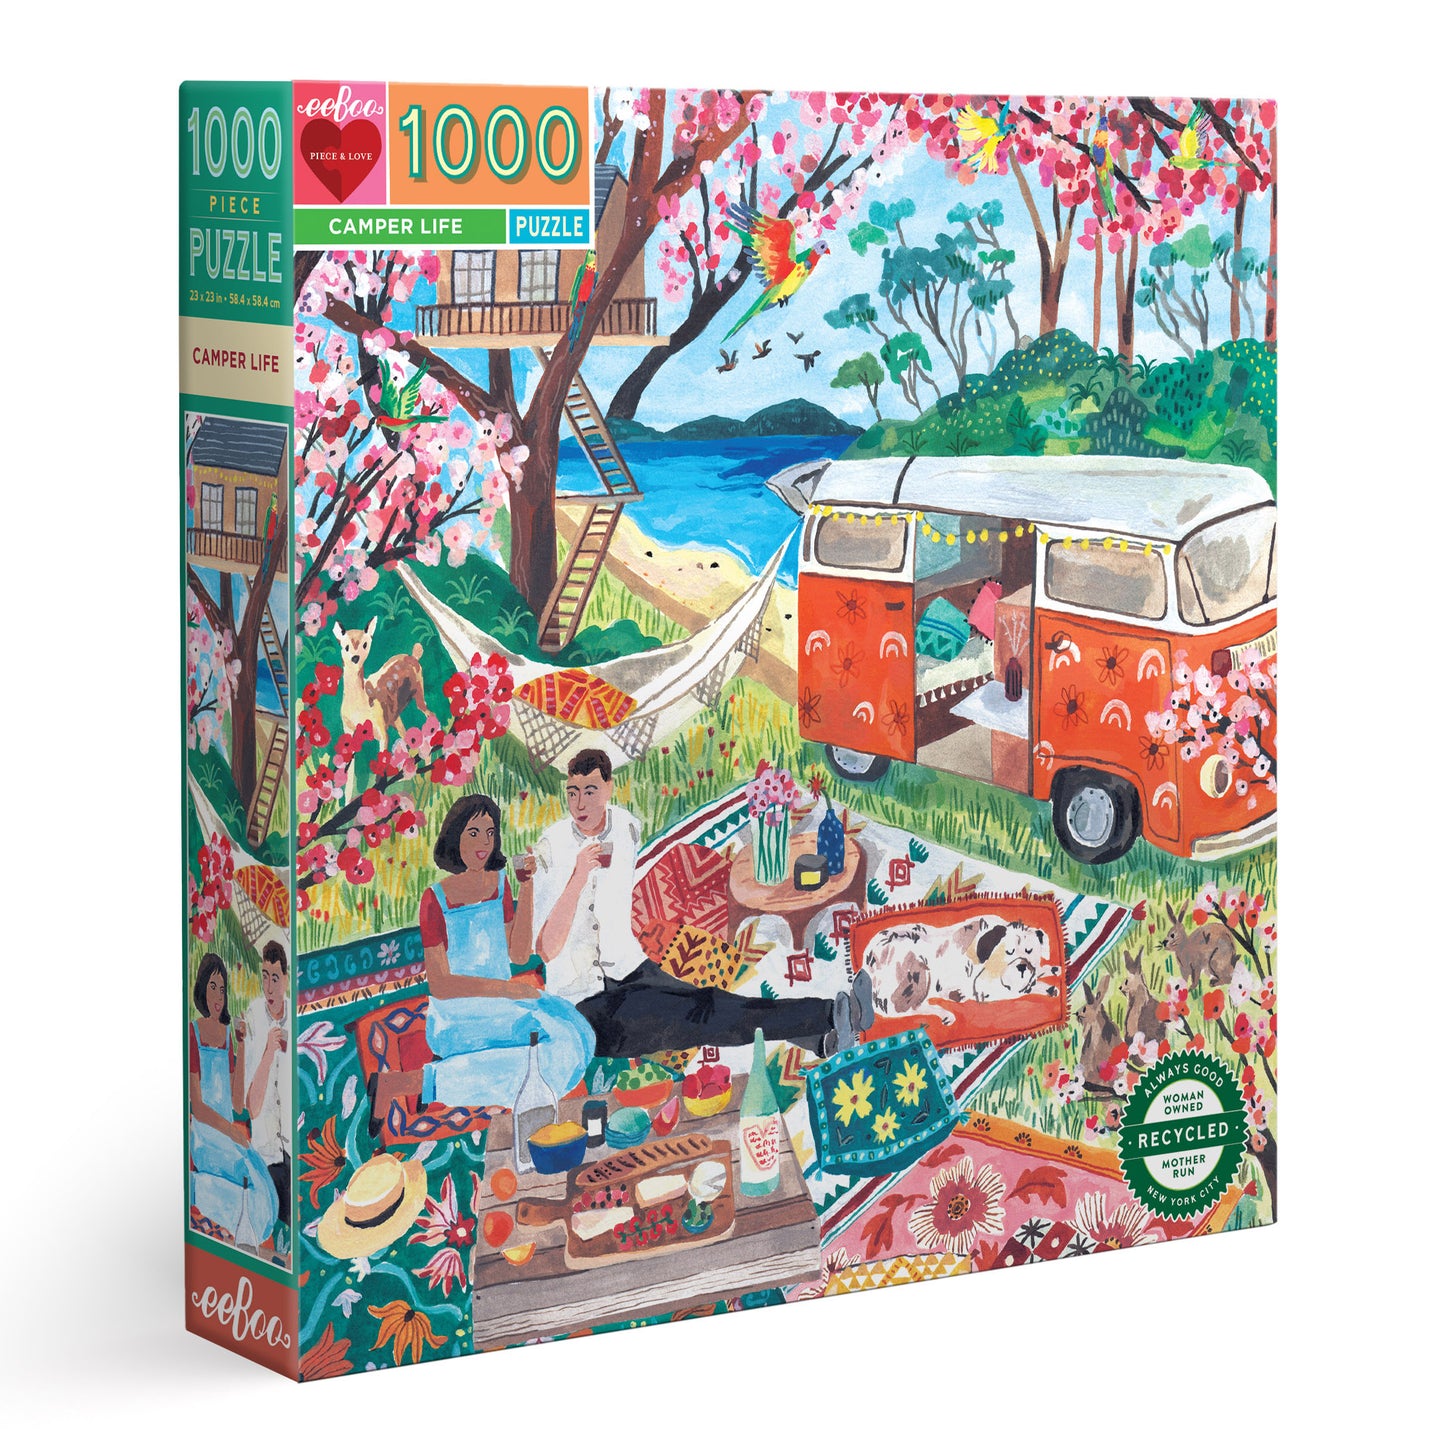 Camper Life 1000 Piece Jigsaw Puzzle Travel Nomad | eeBoo Piece & Love | Gifts for Van Life Travelers